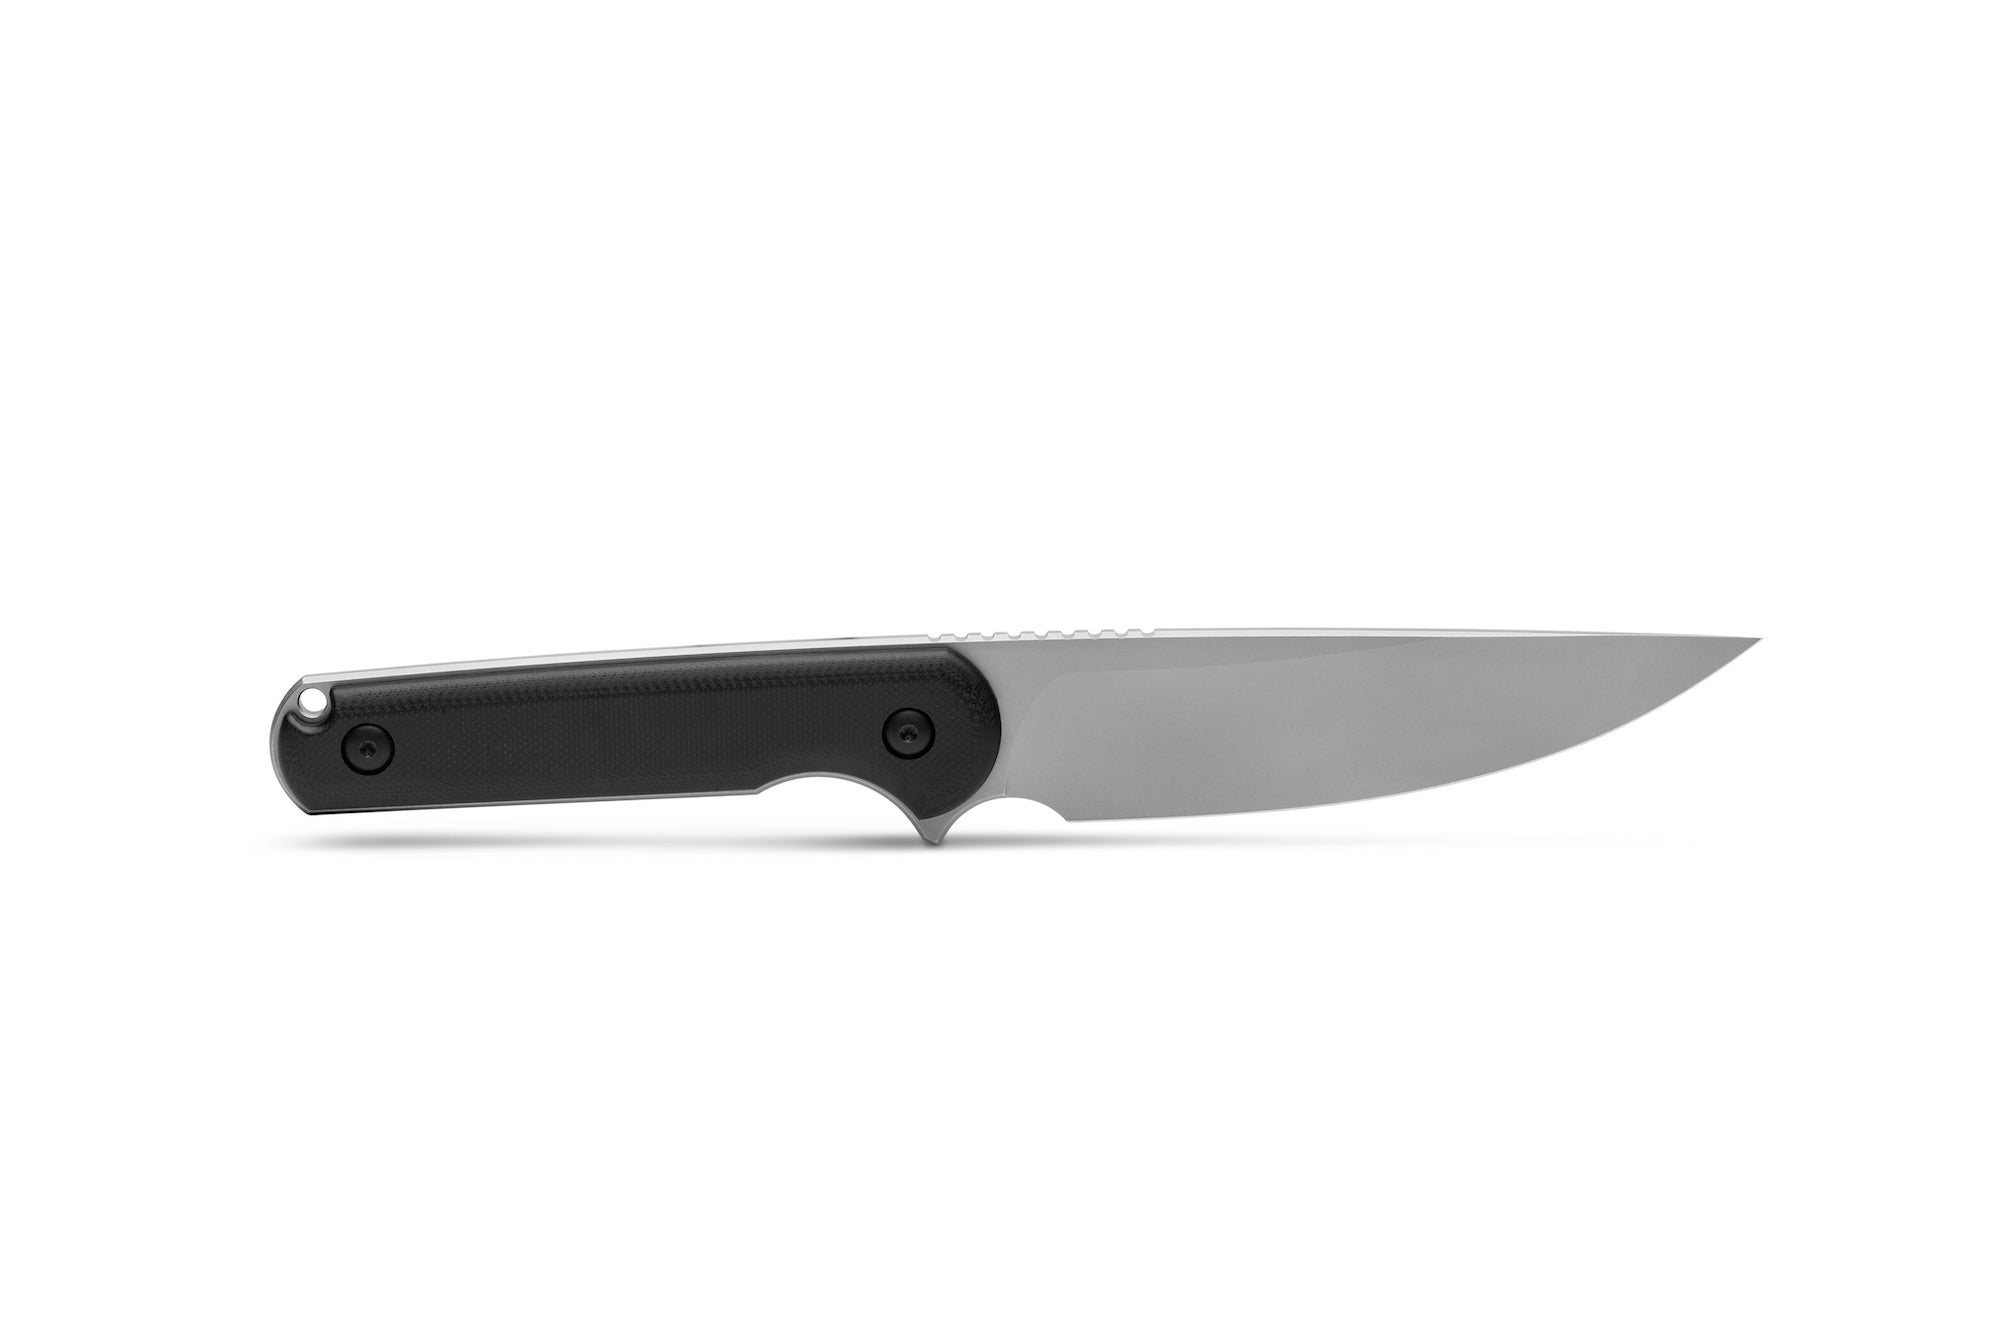 Ferrum Forge Lackey XL Fixed Blade Knife with Black G10 handle and D2 or 9Cr18MoV Steel